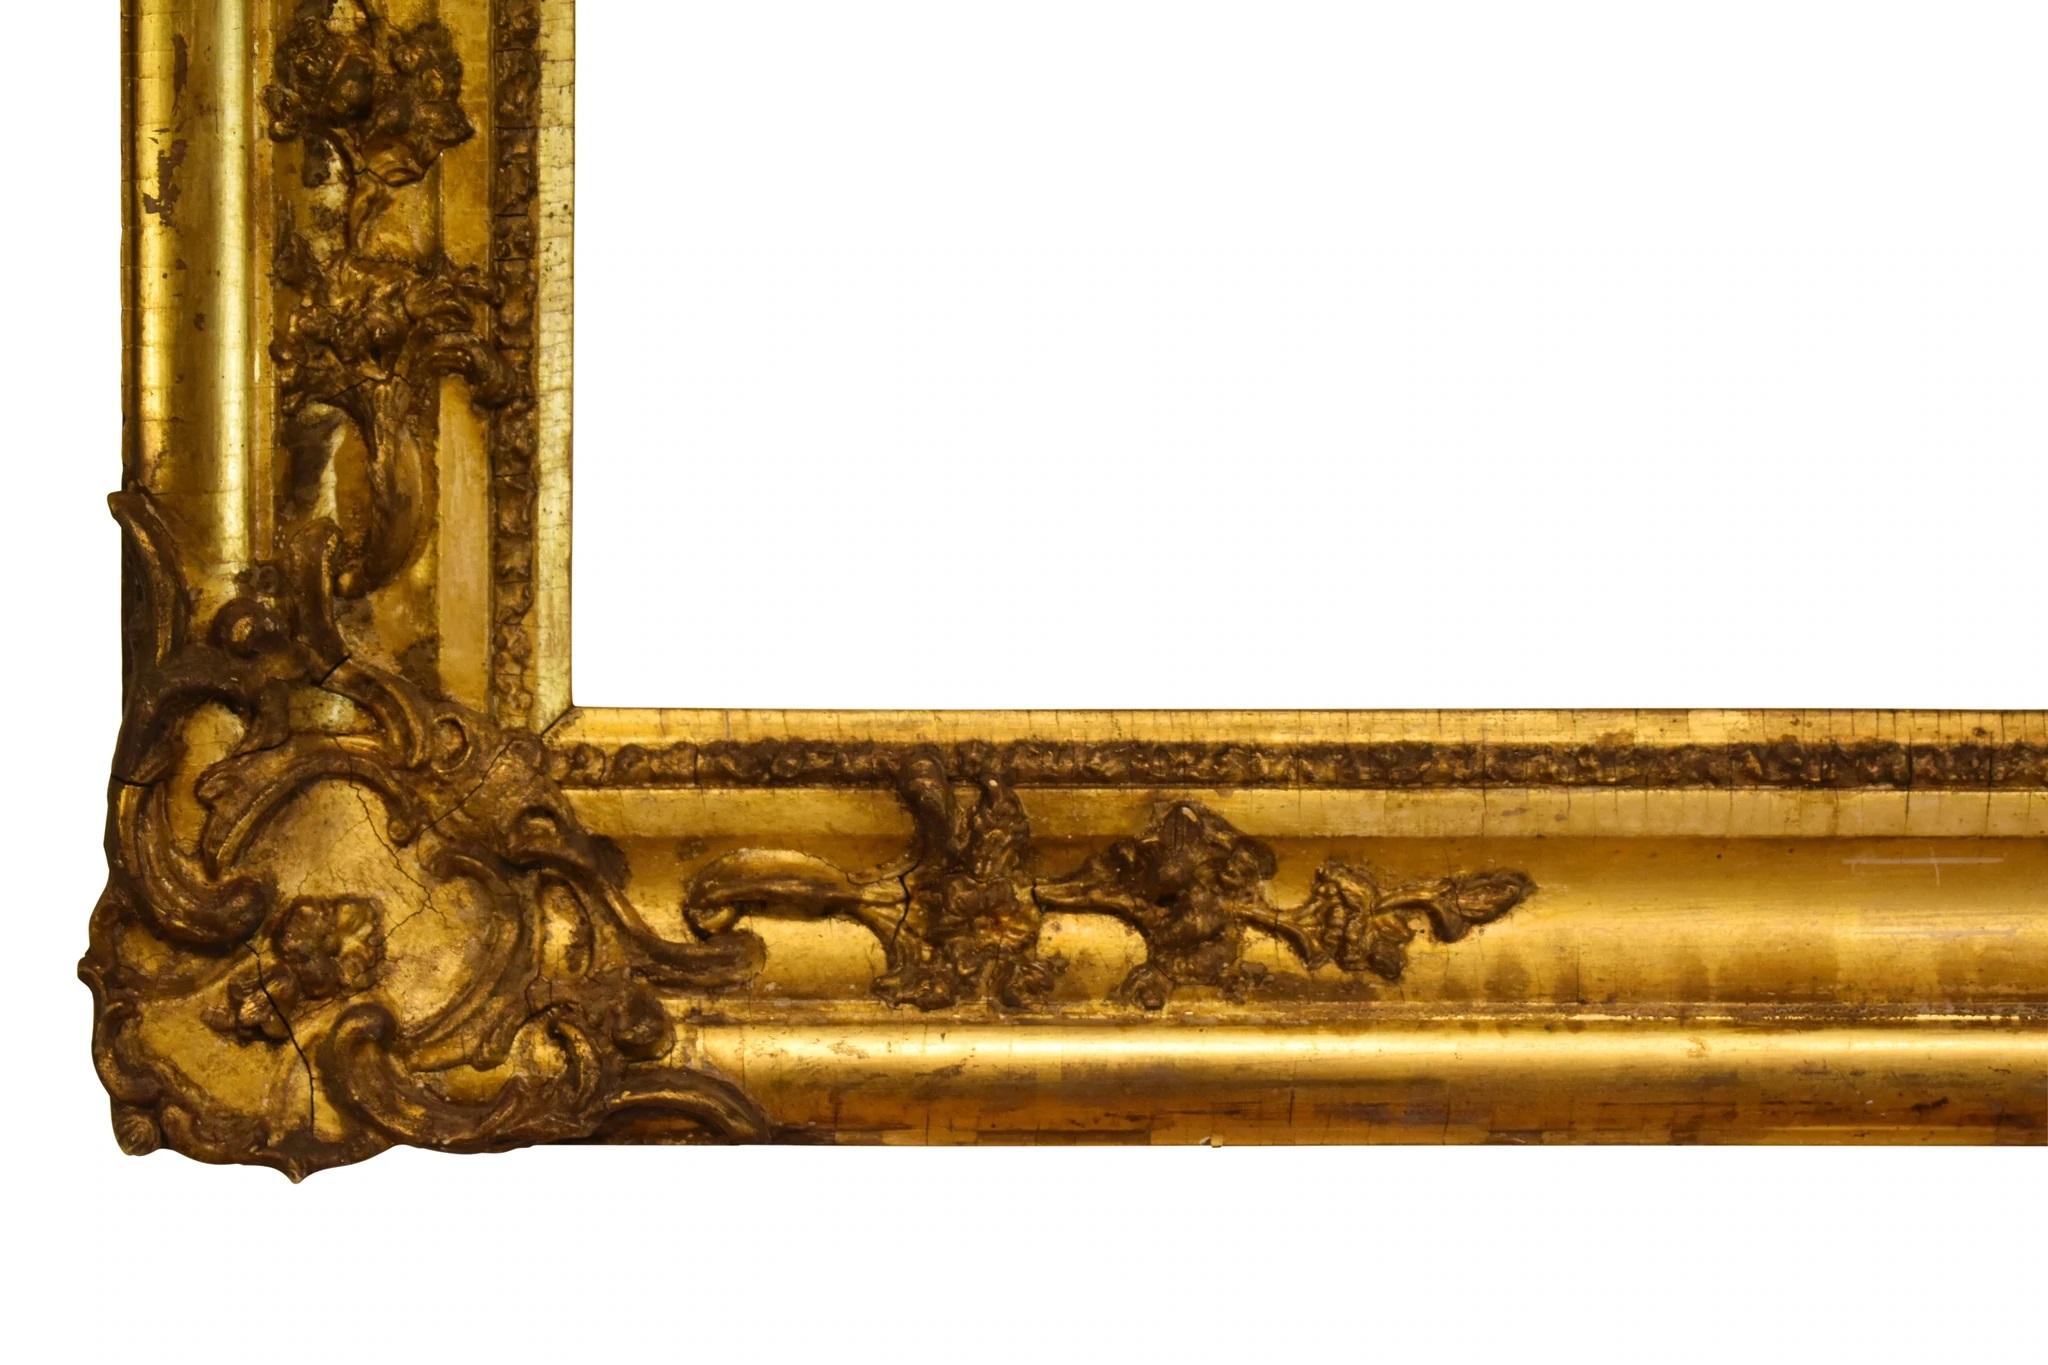 Victorian Gold Leaf Picture Frame, American or English , circa 1840..

Rabbet Dimensions: 23